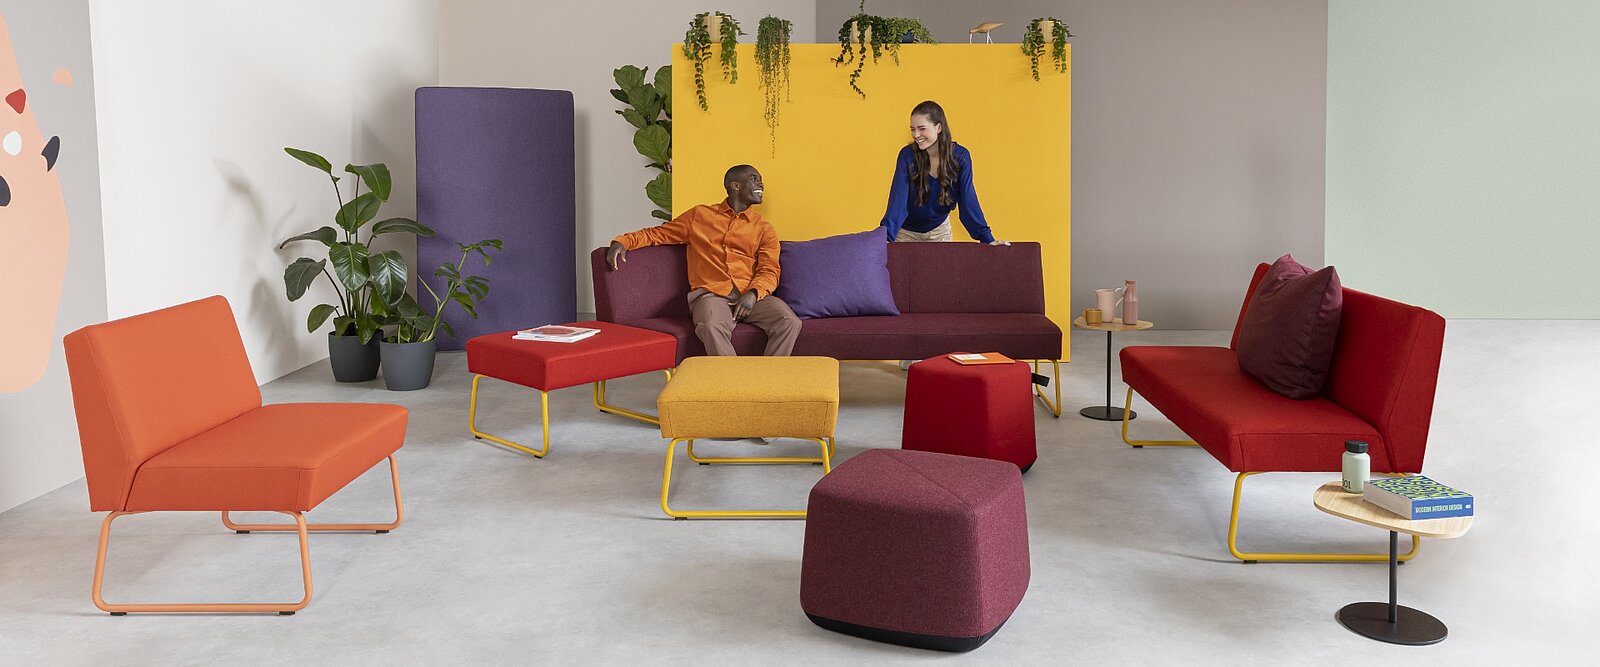 Flexibility is our motto. Our solution: Reefs flex! Its modularity makes it the ideal partner for contemporary communication spaces and lounge areas.